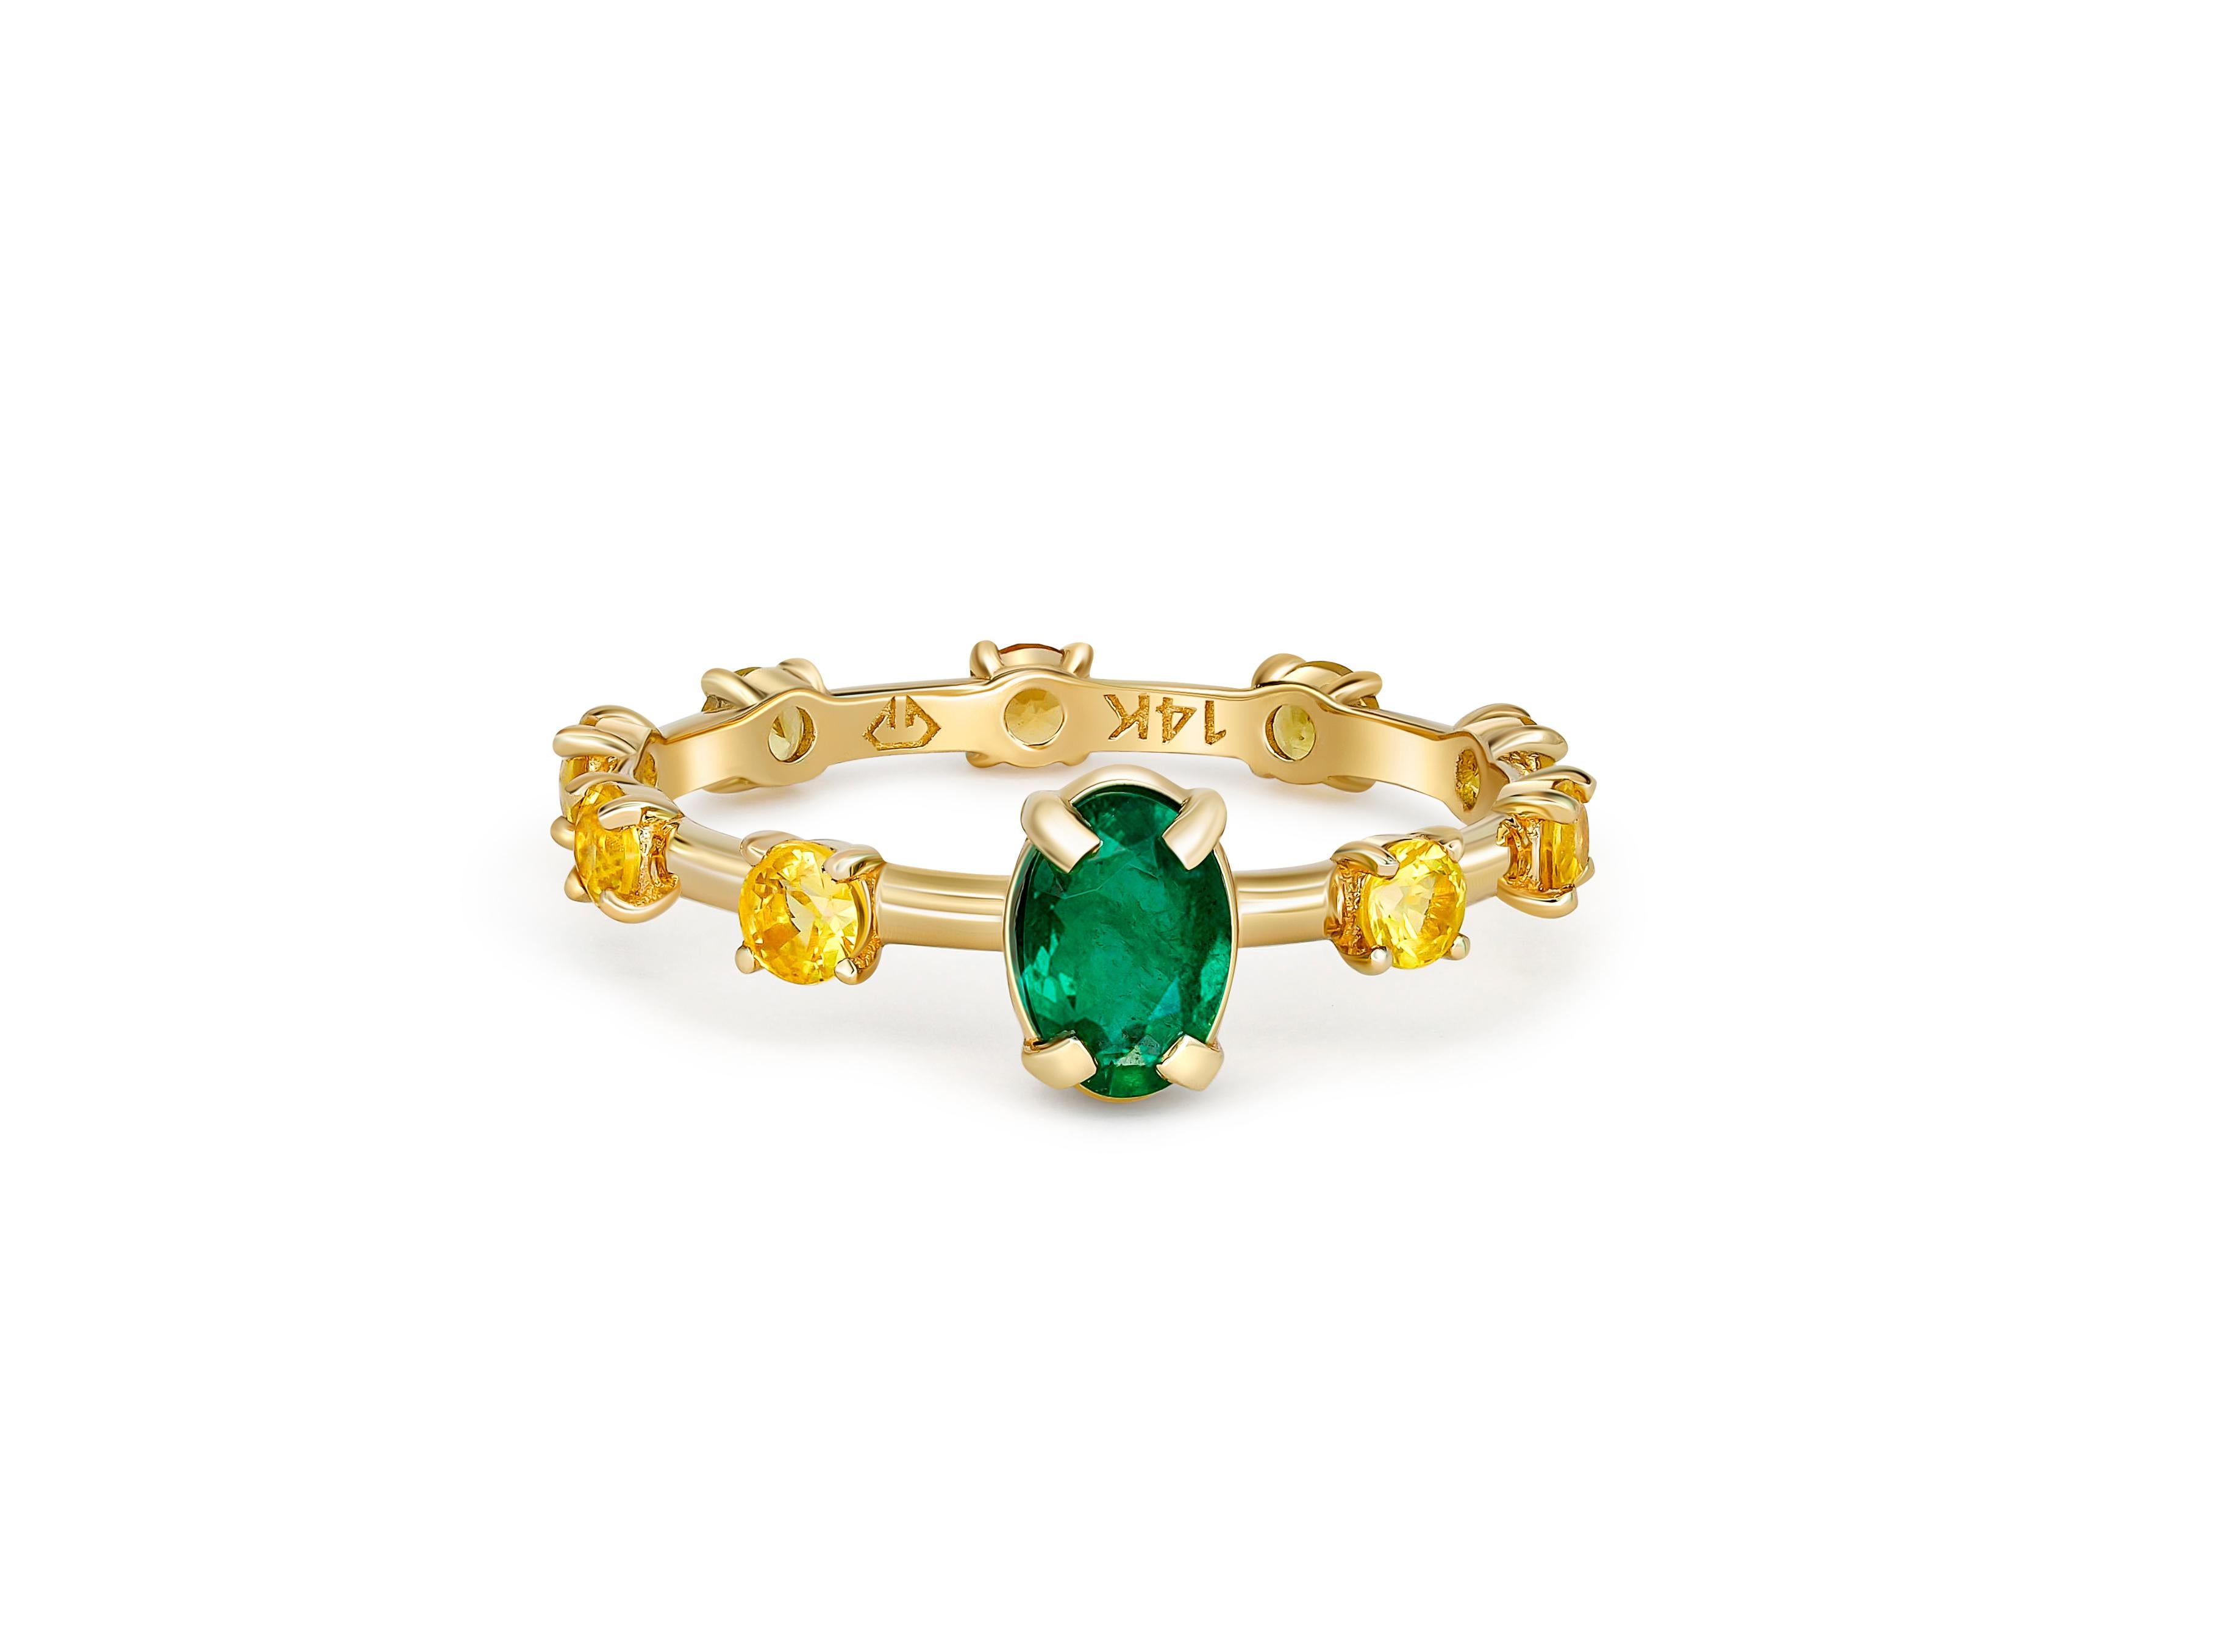 Emerald 14k gold ring. 
Eternity ring with Emerald, Sapphires. Yellow sapphire ring. Emerald Engagement ring. Vintage emerald ring.

Metal: 14k gold.
Weight: 1.45 g. depends from size.

Set with emerald, color - gren
oval cut, aprx 0.80 ct. in total